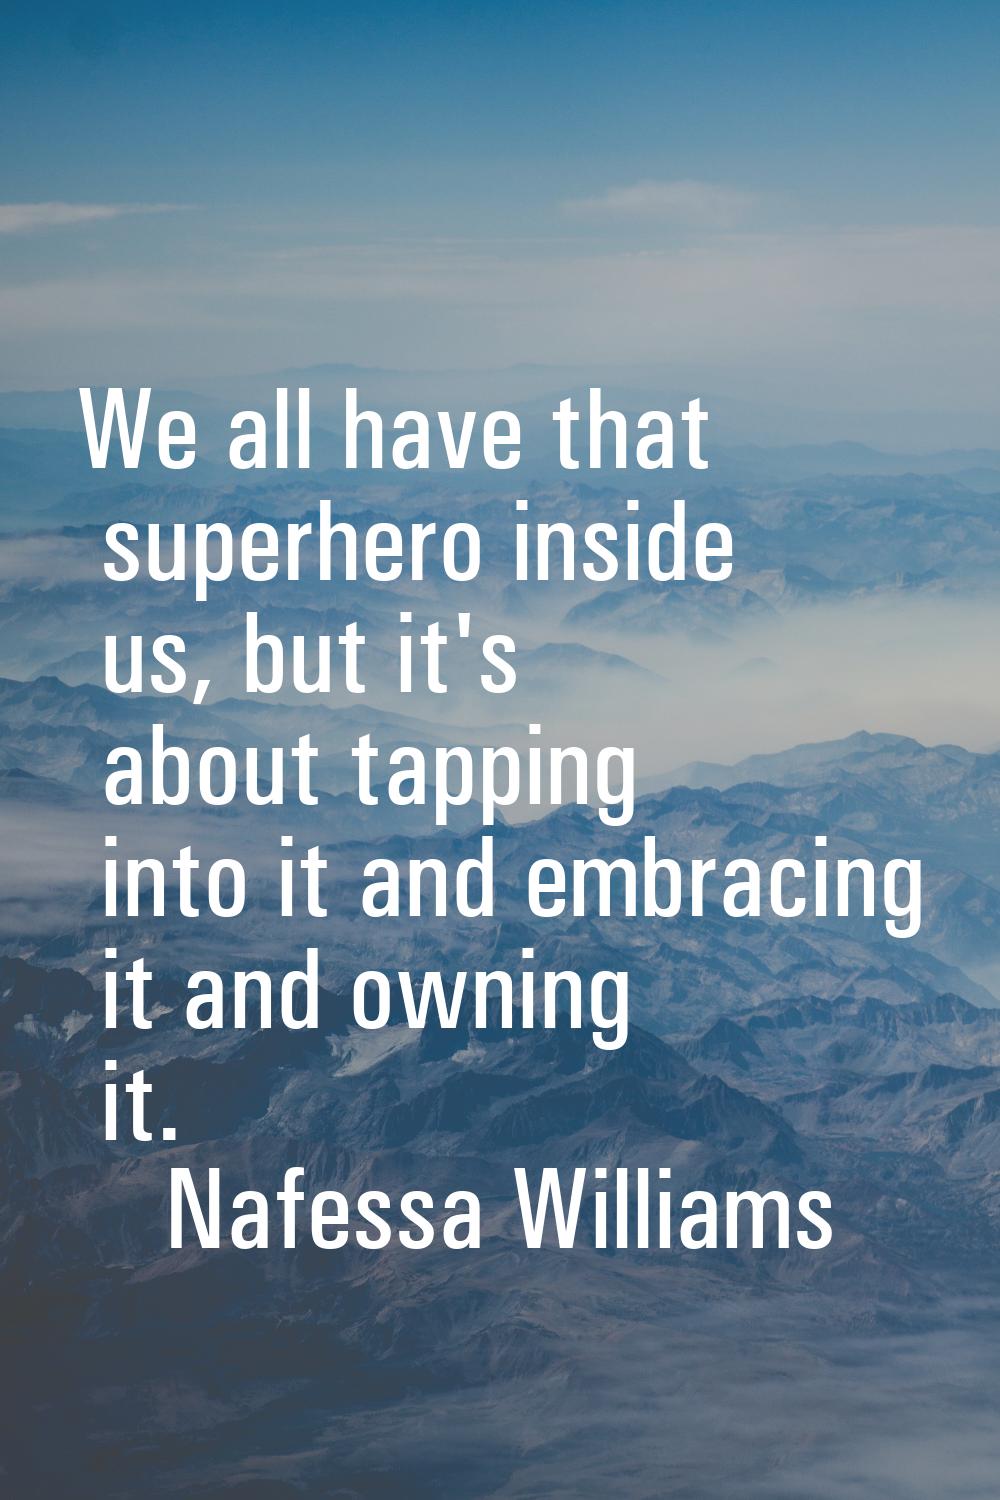 We all have that superhero inside us, but it's about tapping into it and embracing it and owning it